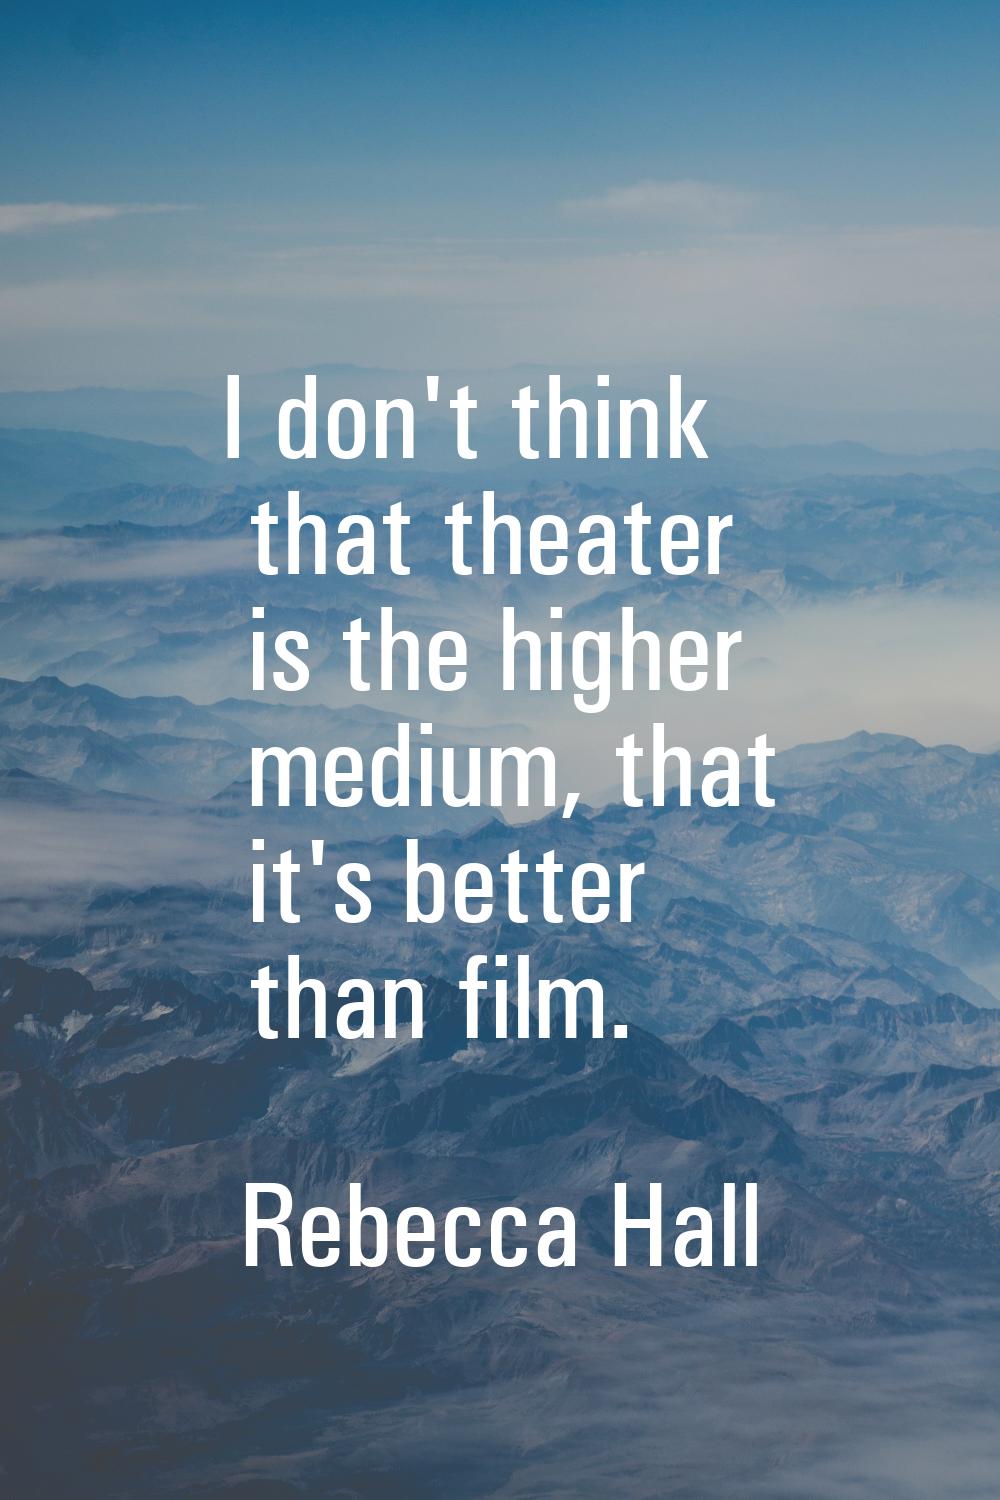 I don't think that theater is the higher medium, that it's better than film.